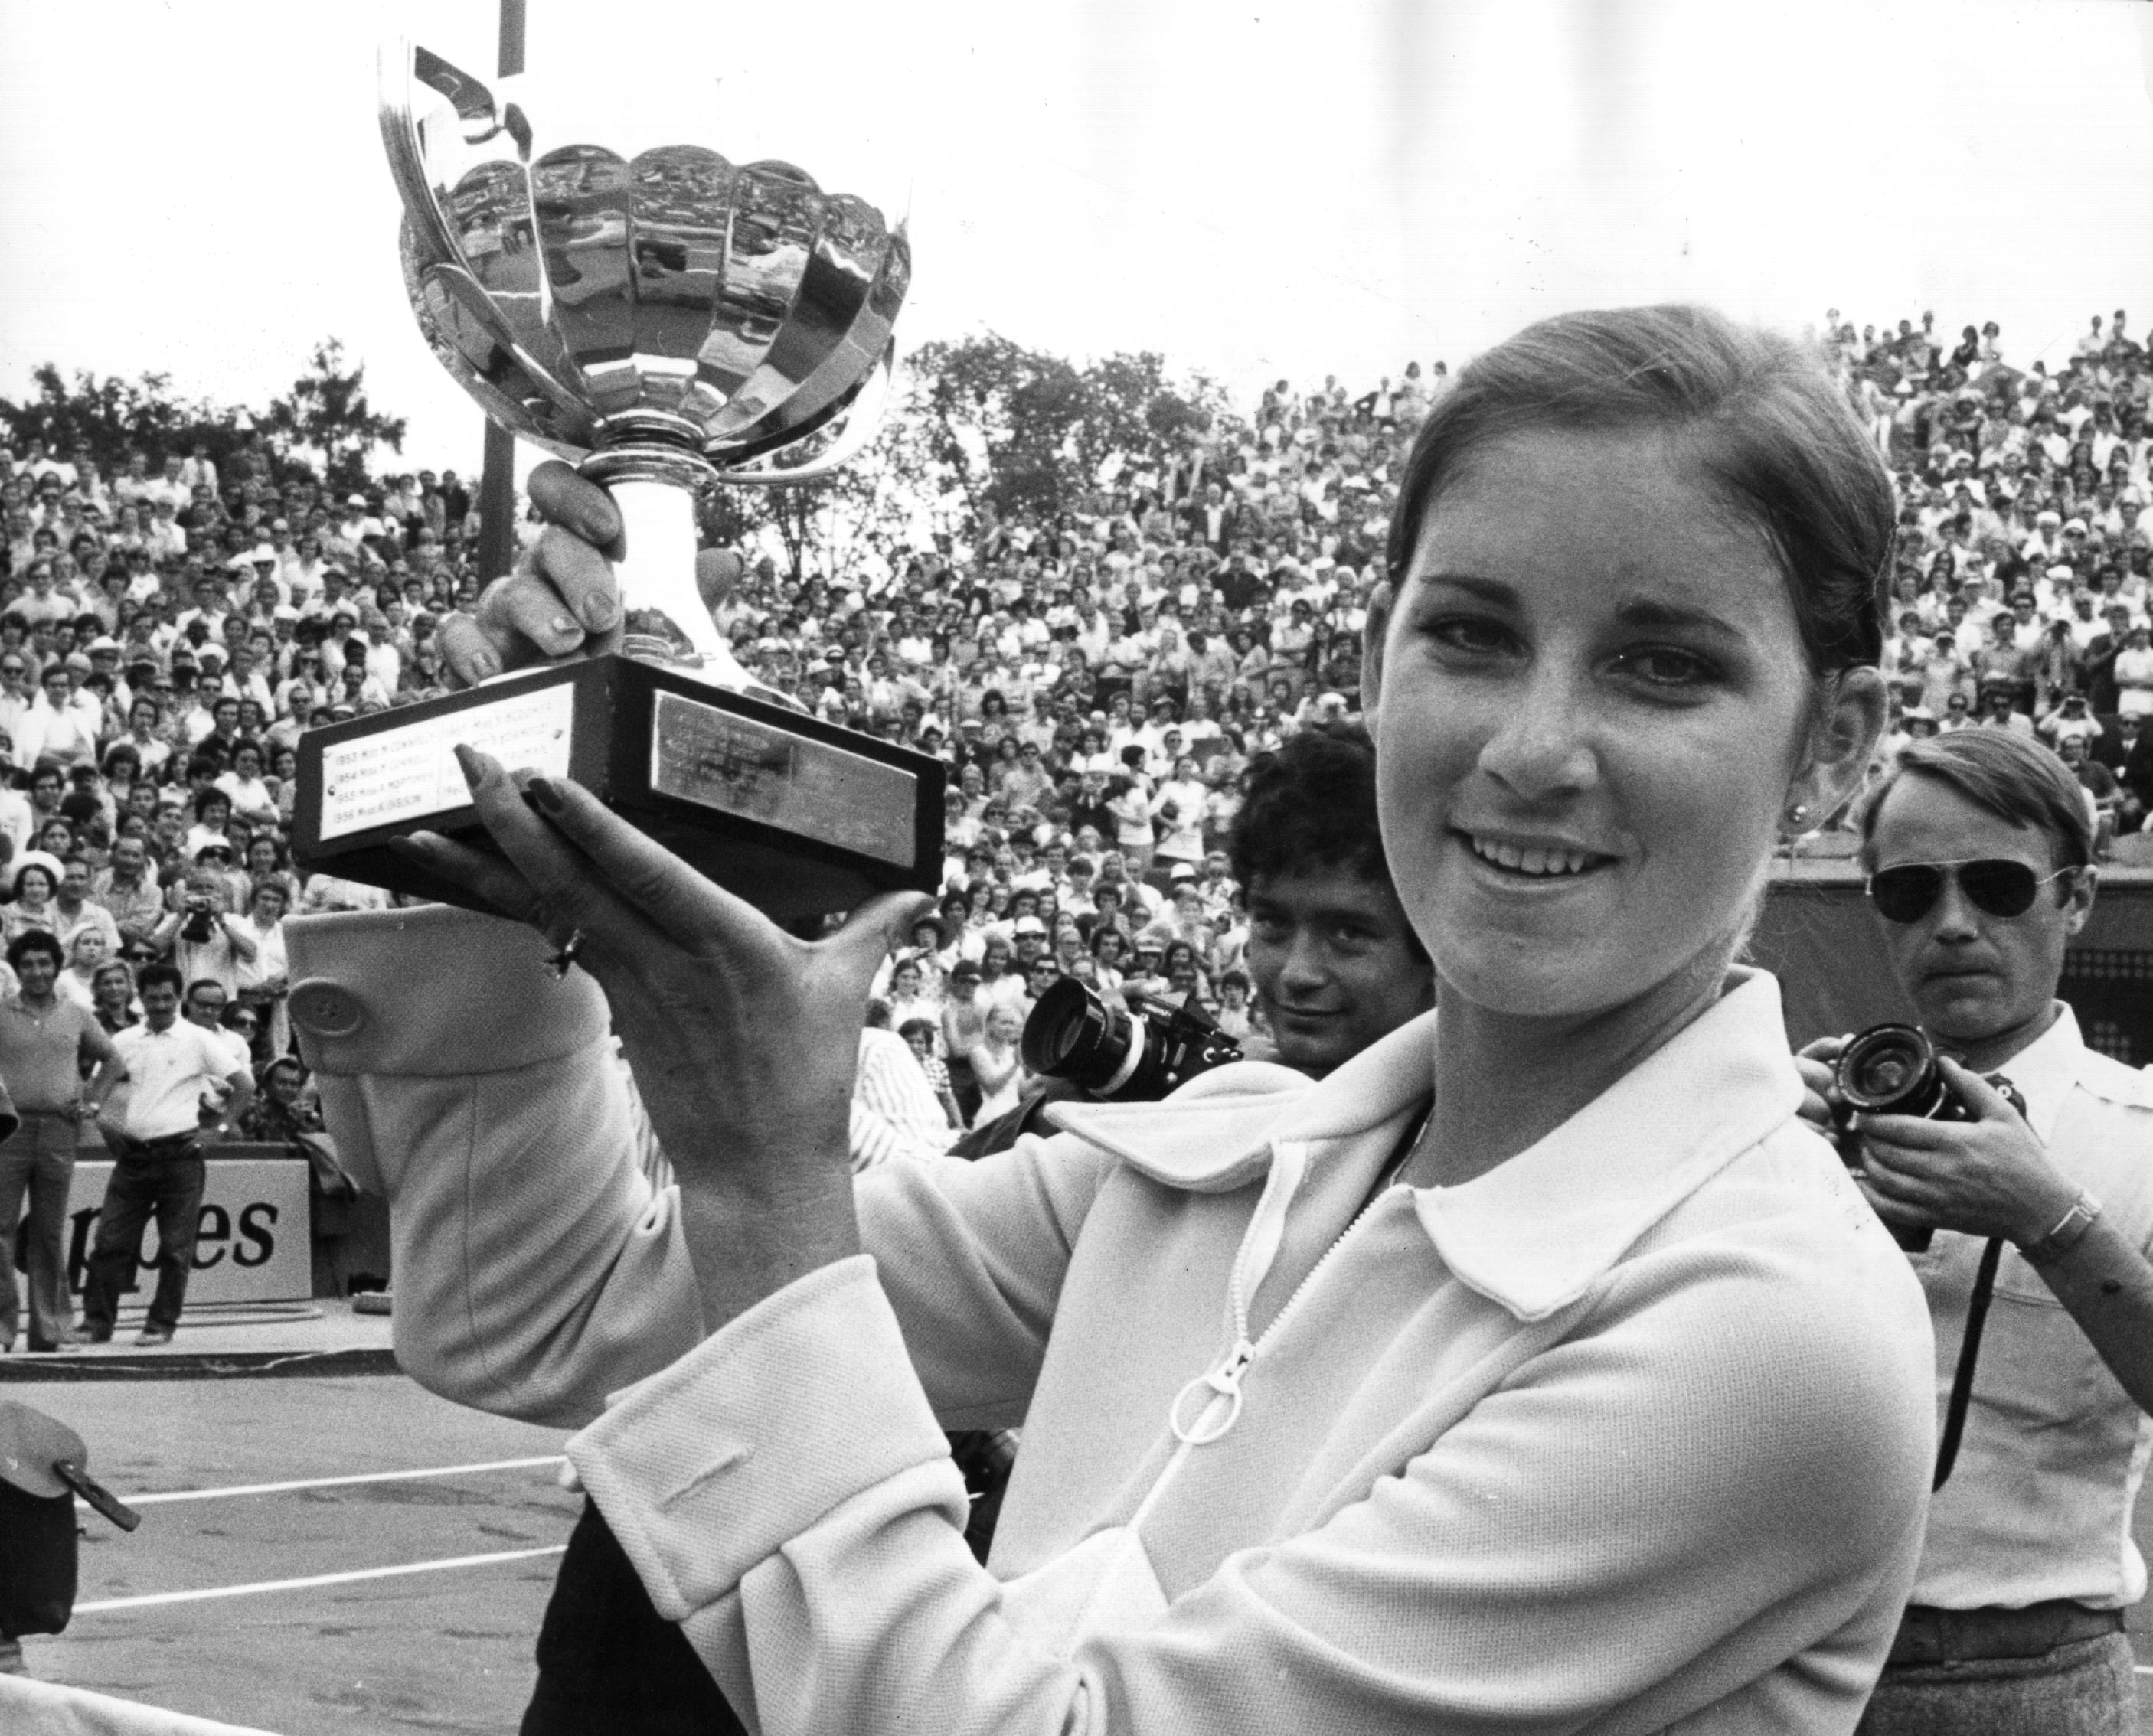 Chris Evert lifts the Coupe Suzanne Lenglen